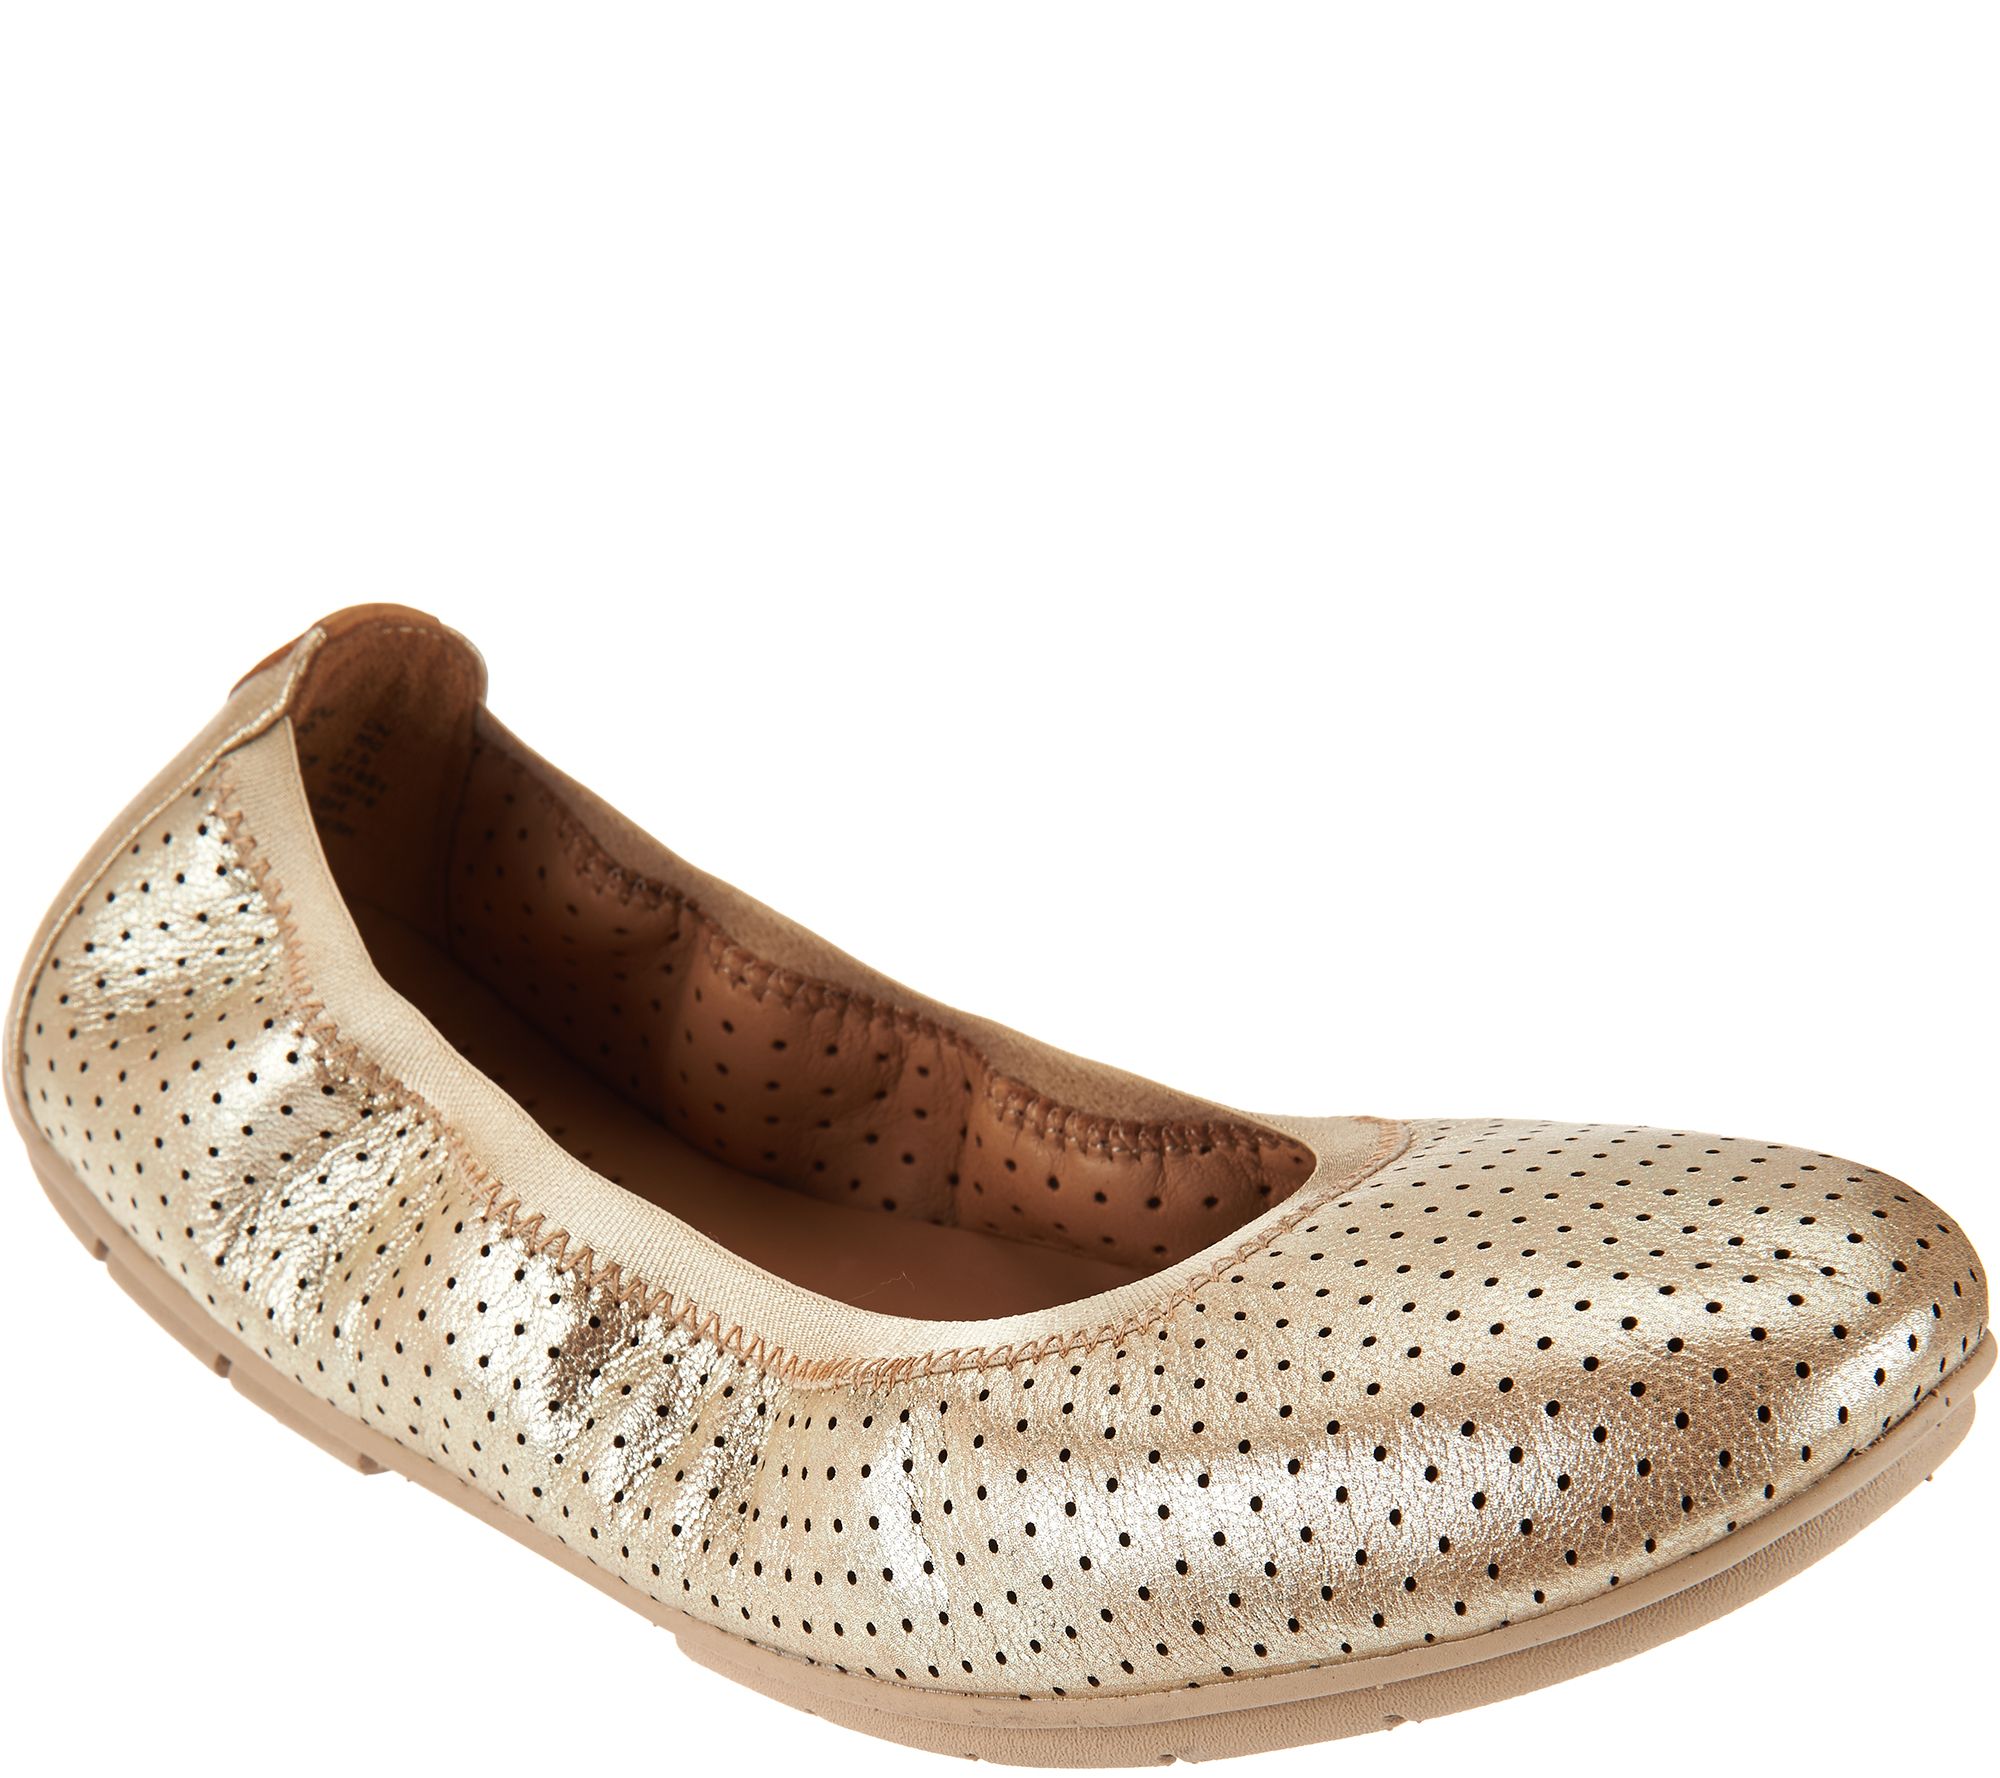 clarks unstructured flats